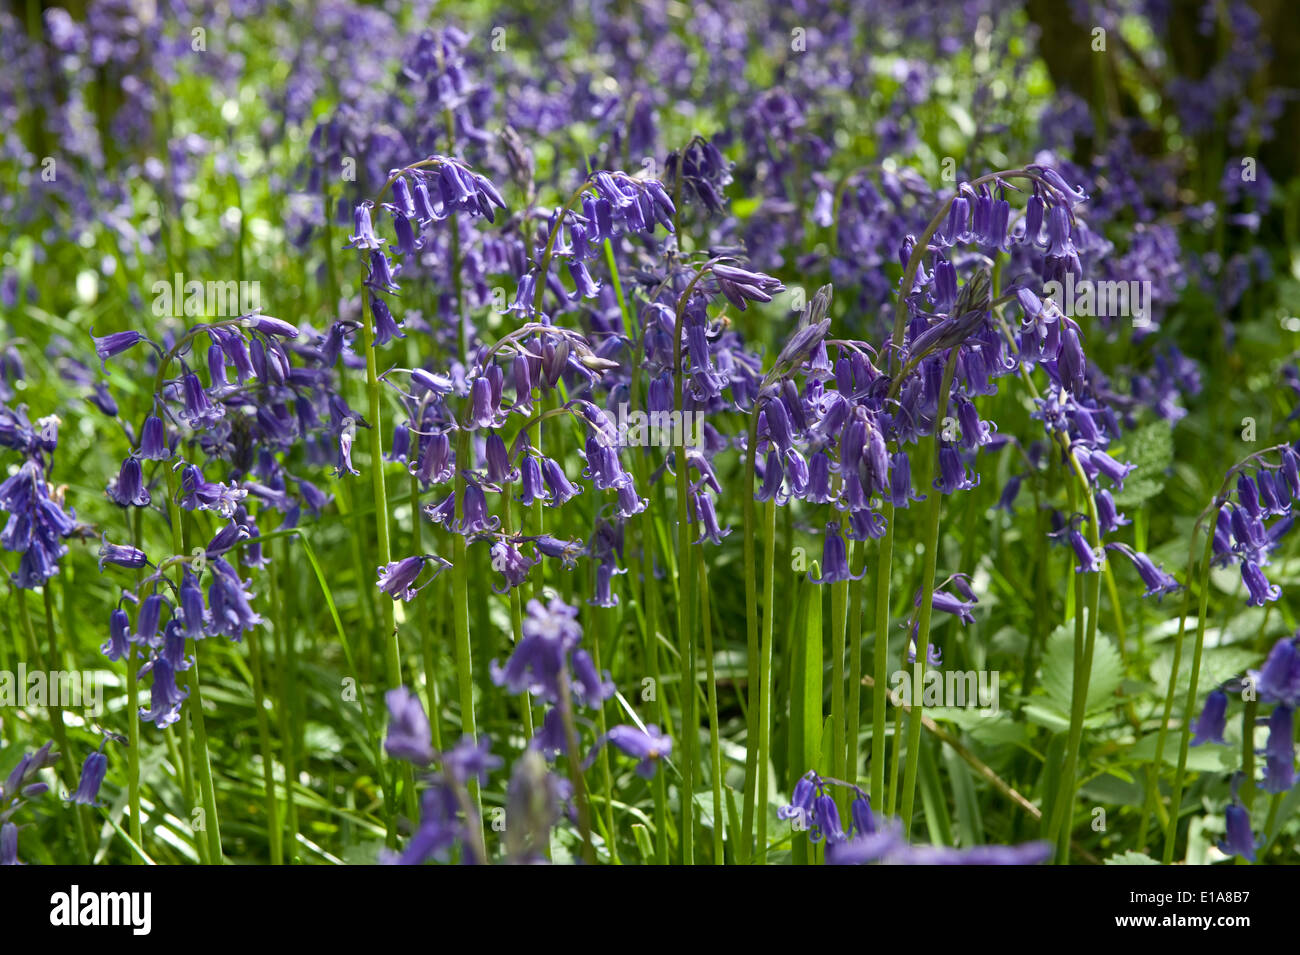 Flowering bluebells, Hyacinthoides non-scripta, in hazel woodland on the Berkshire Downs in spring Stock Photo